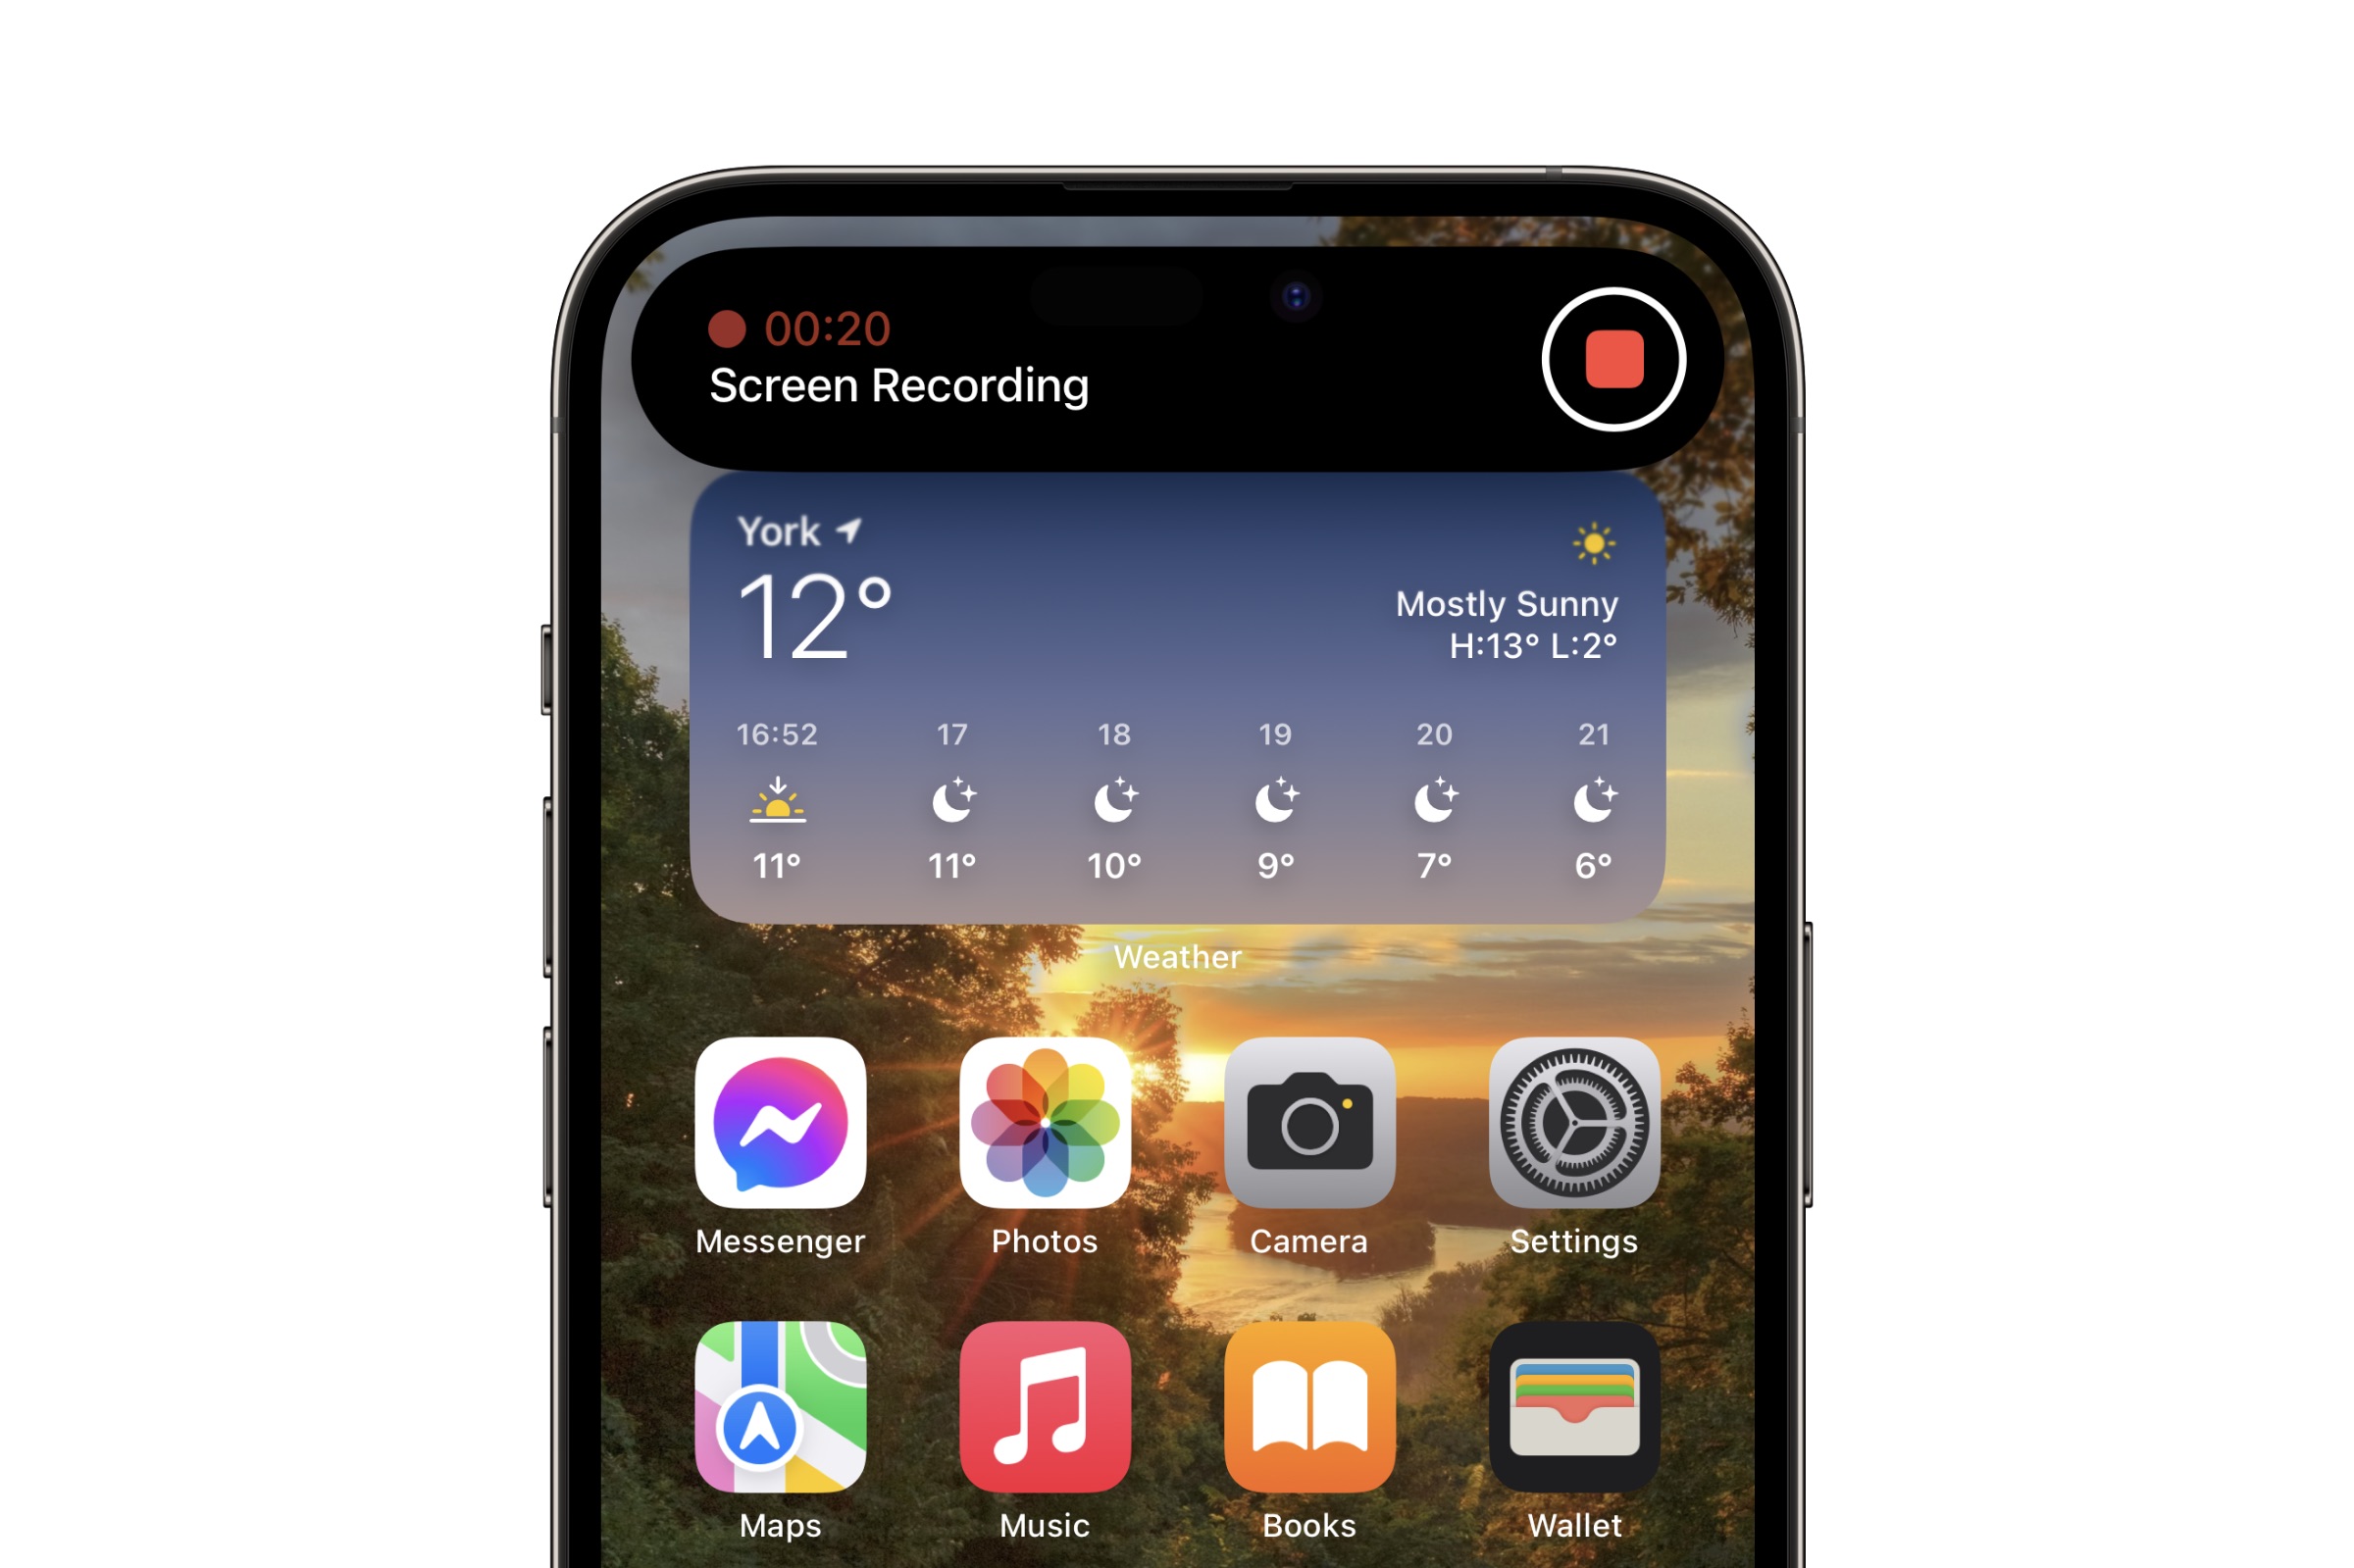 iPhone showing home screen with screen recording controls in Dynamic Island.